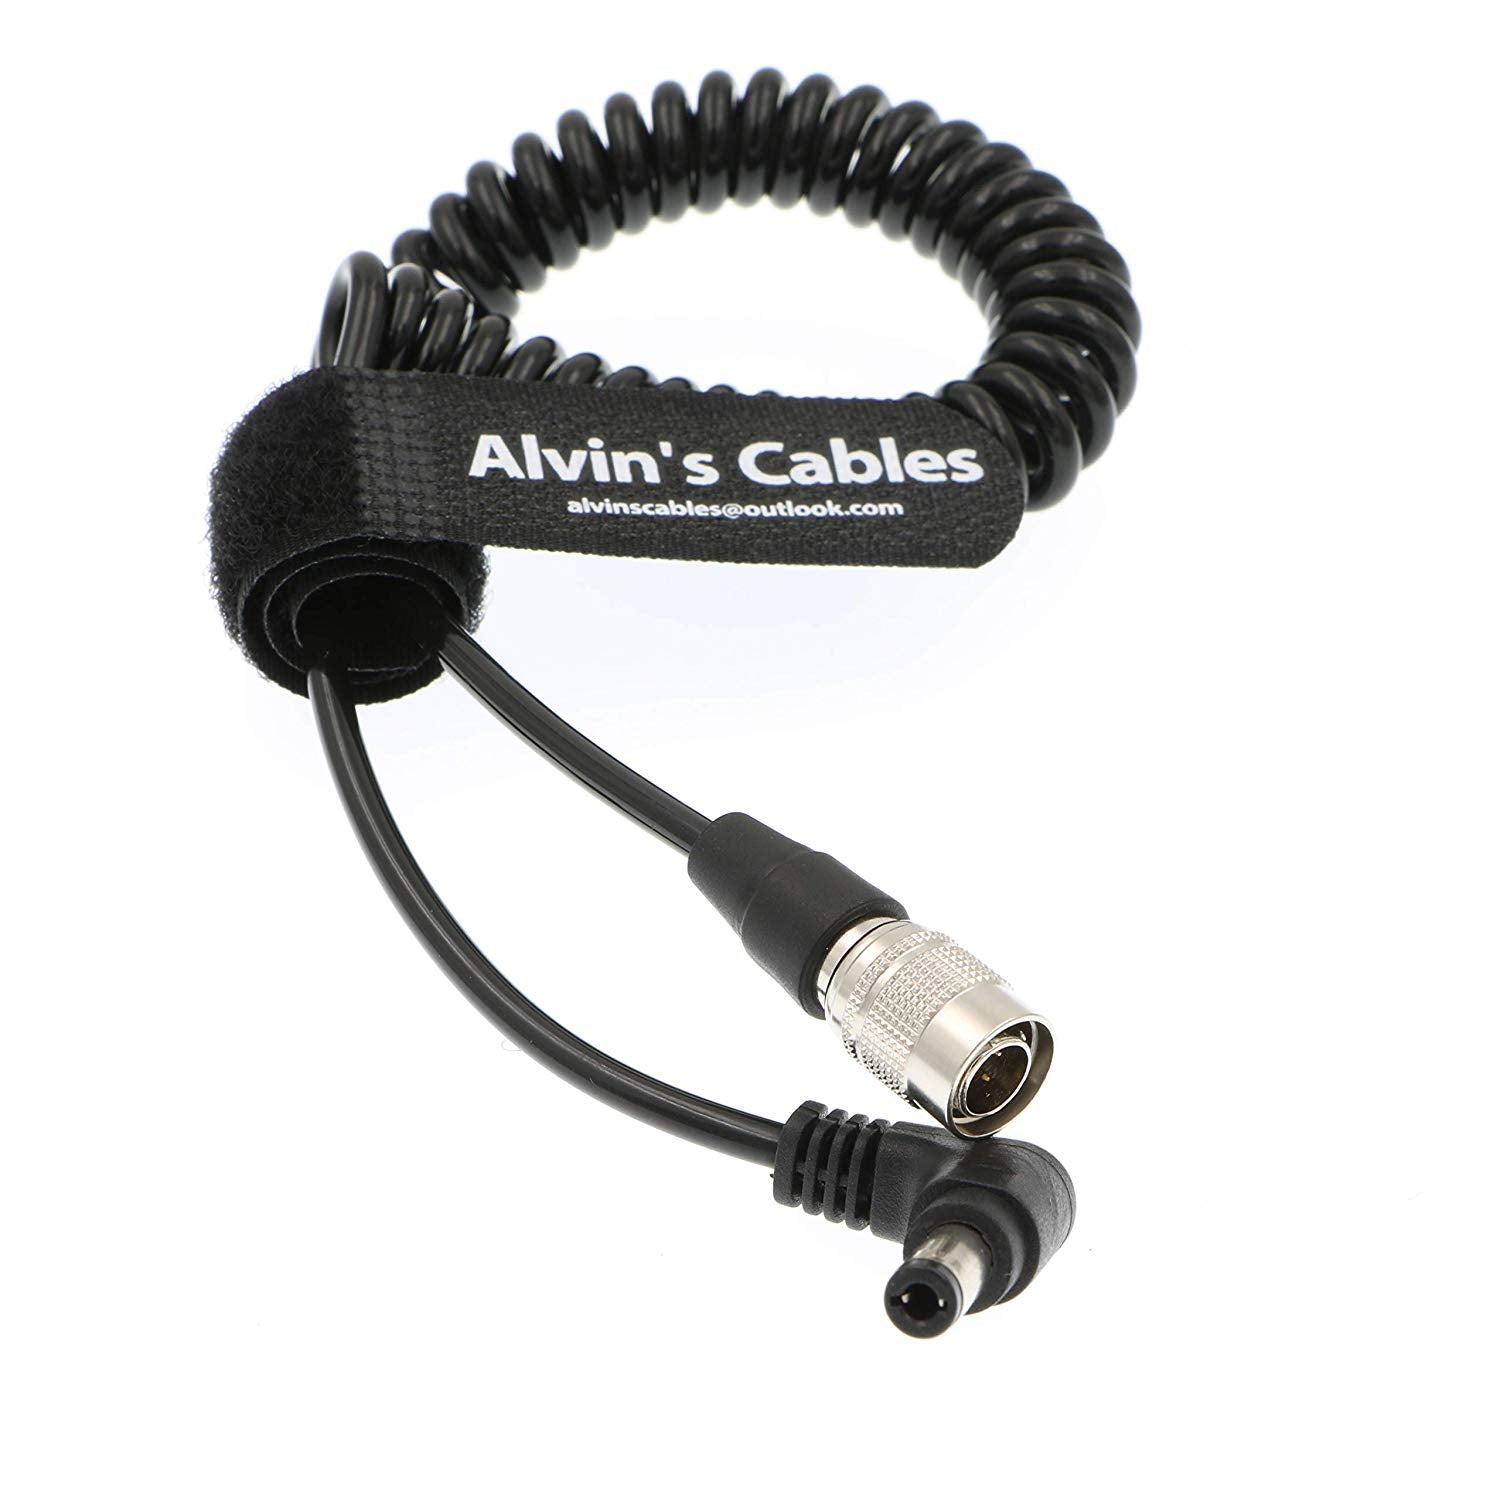 Alvin's Cables Hirose 4 Pin Male to Right Angle DC Jack Power Cable for Sound Devices 633/644/688 Zoom F8 Blackmagic Cinema Camera 4K